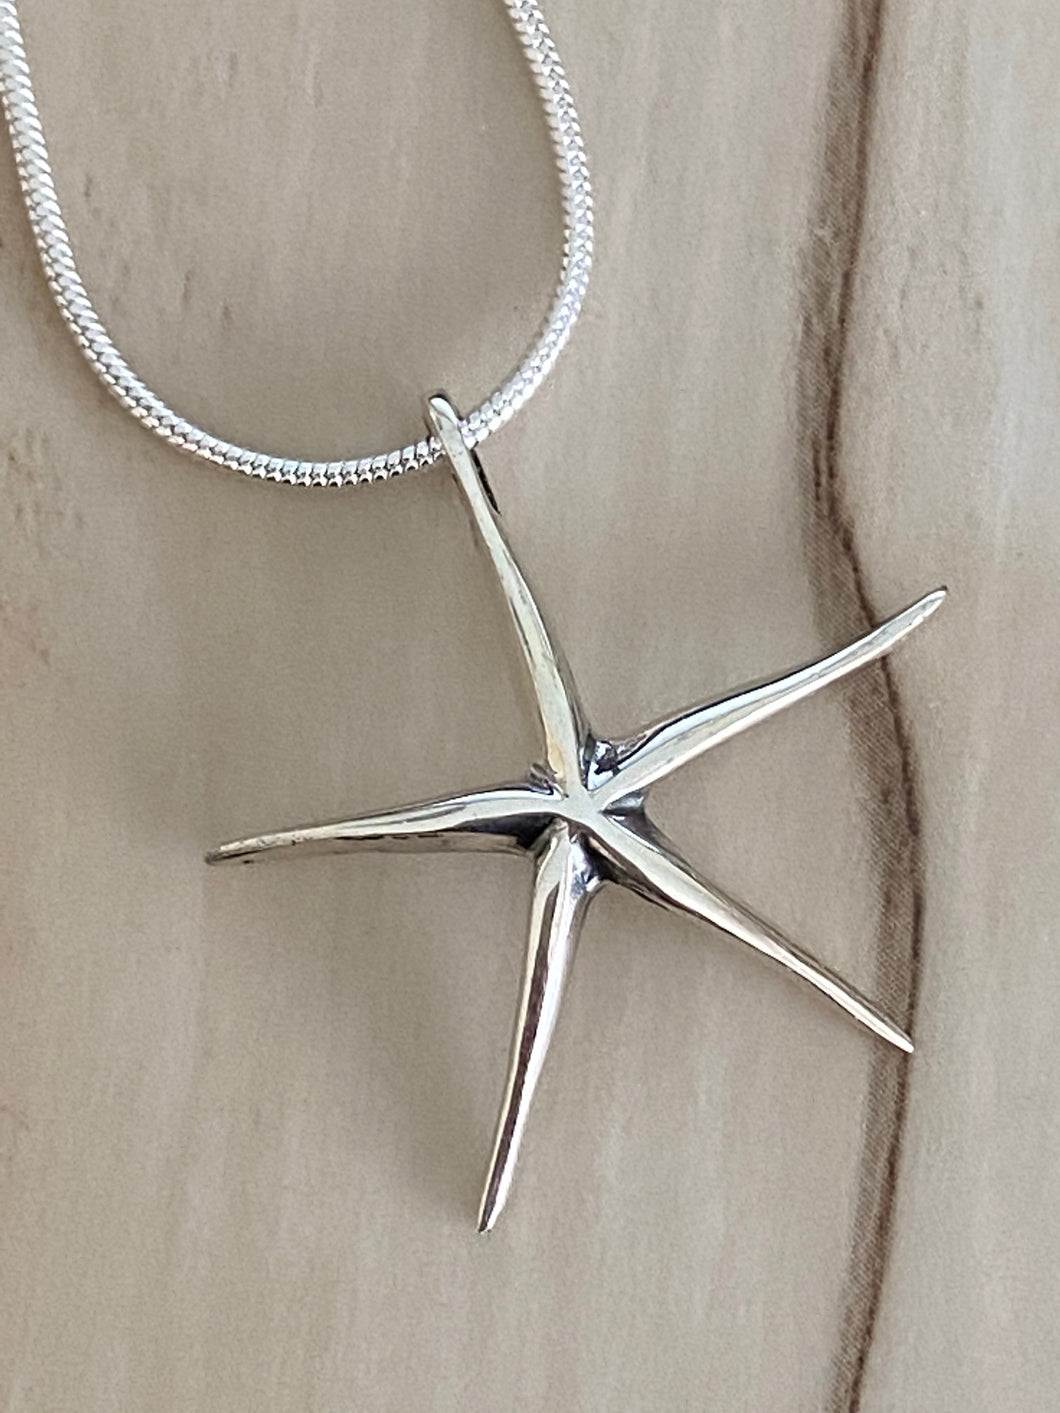 Starfish Pendant 925 Sterling Silver Jewelry. Free Silver Plated Chain. Free Shipping!